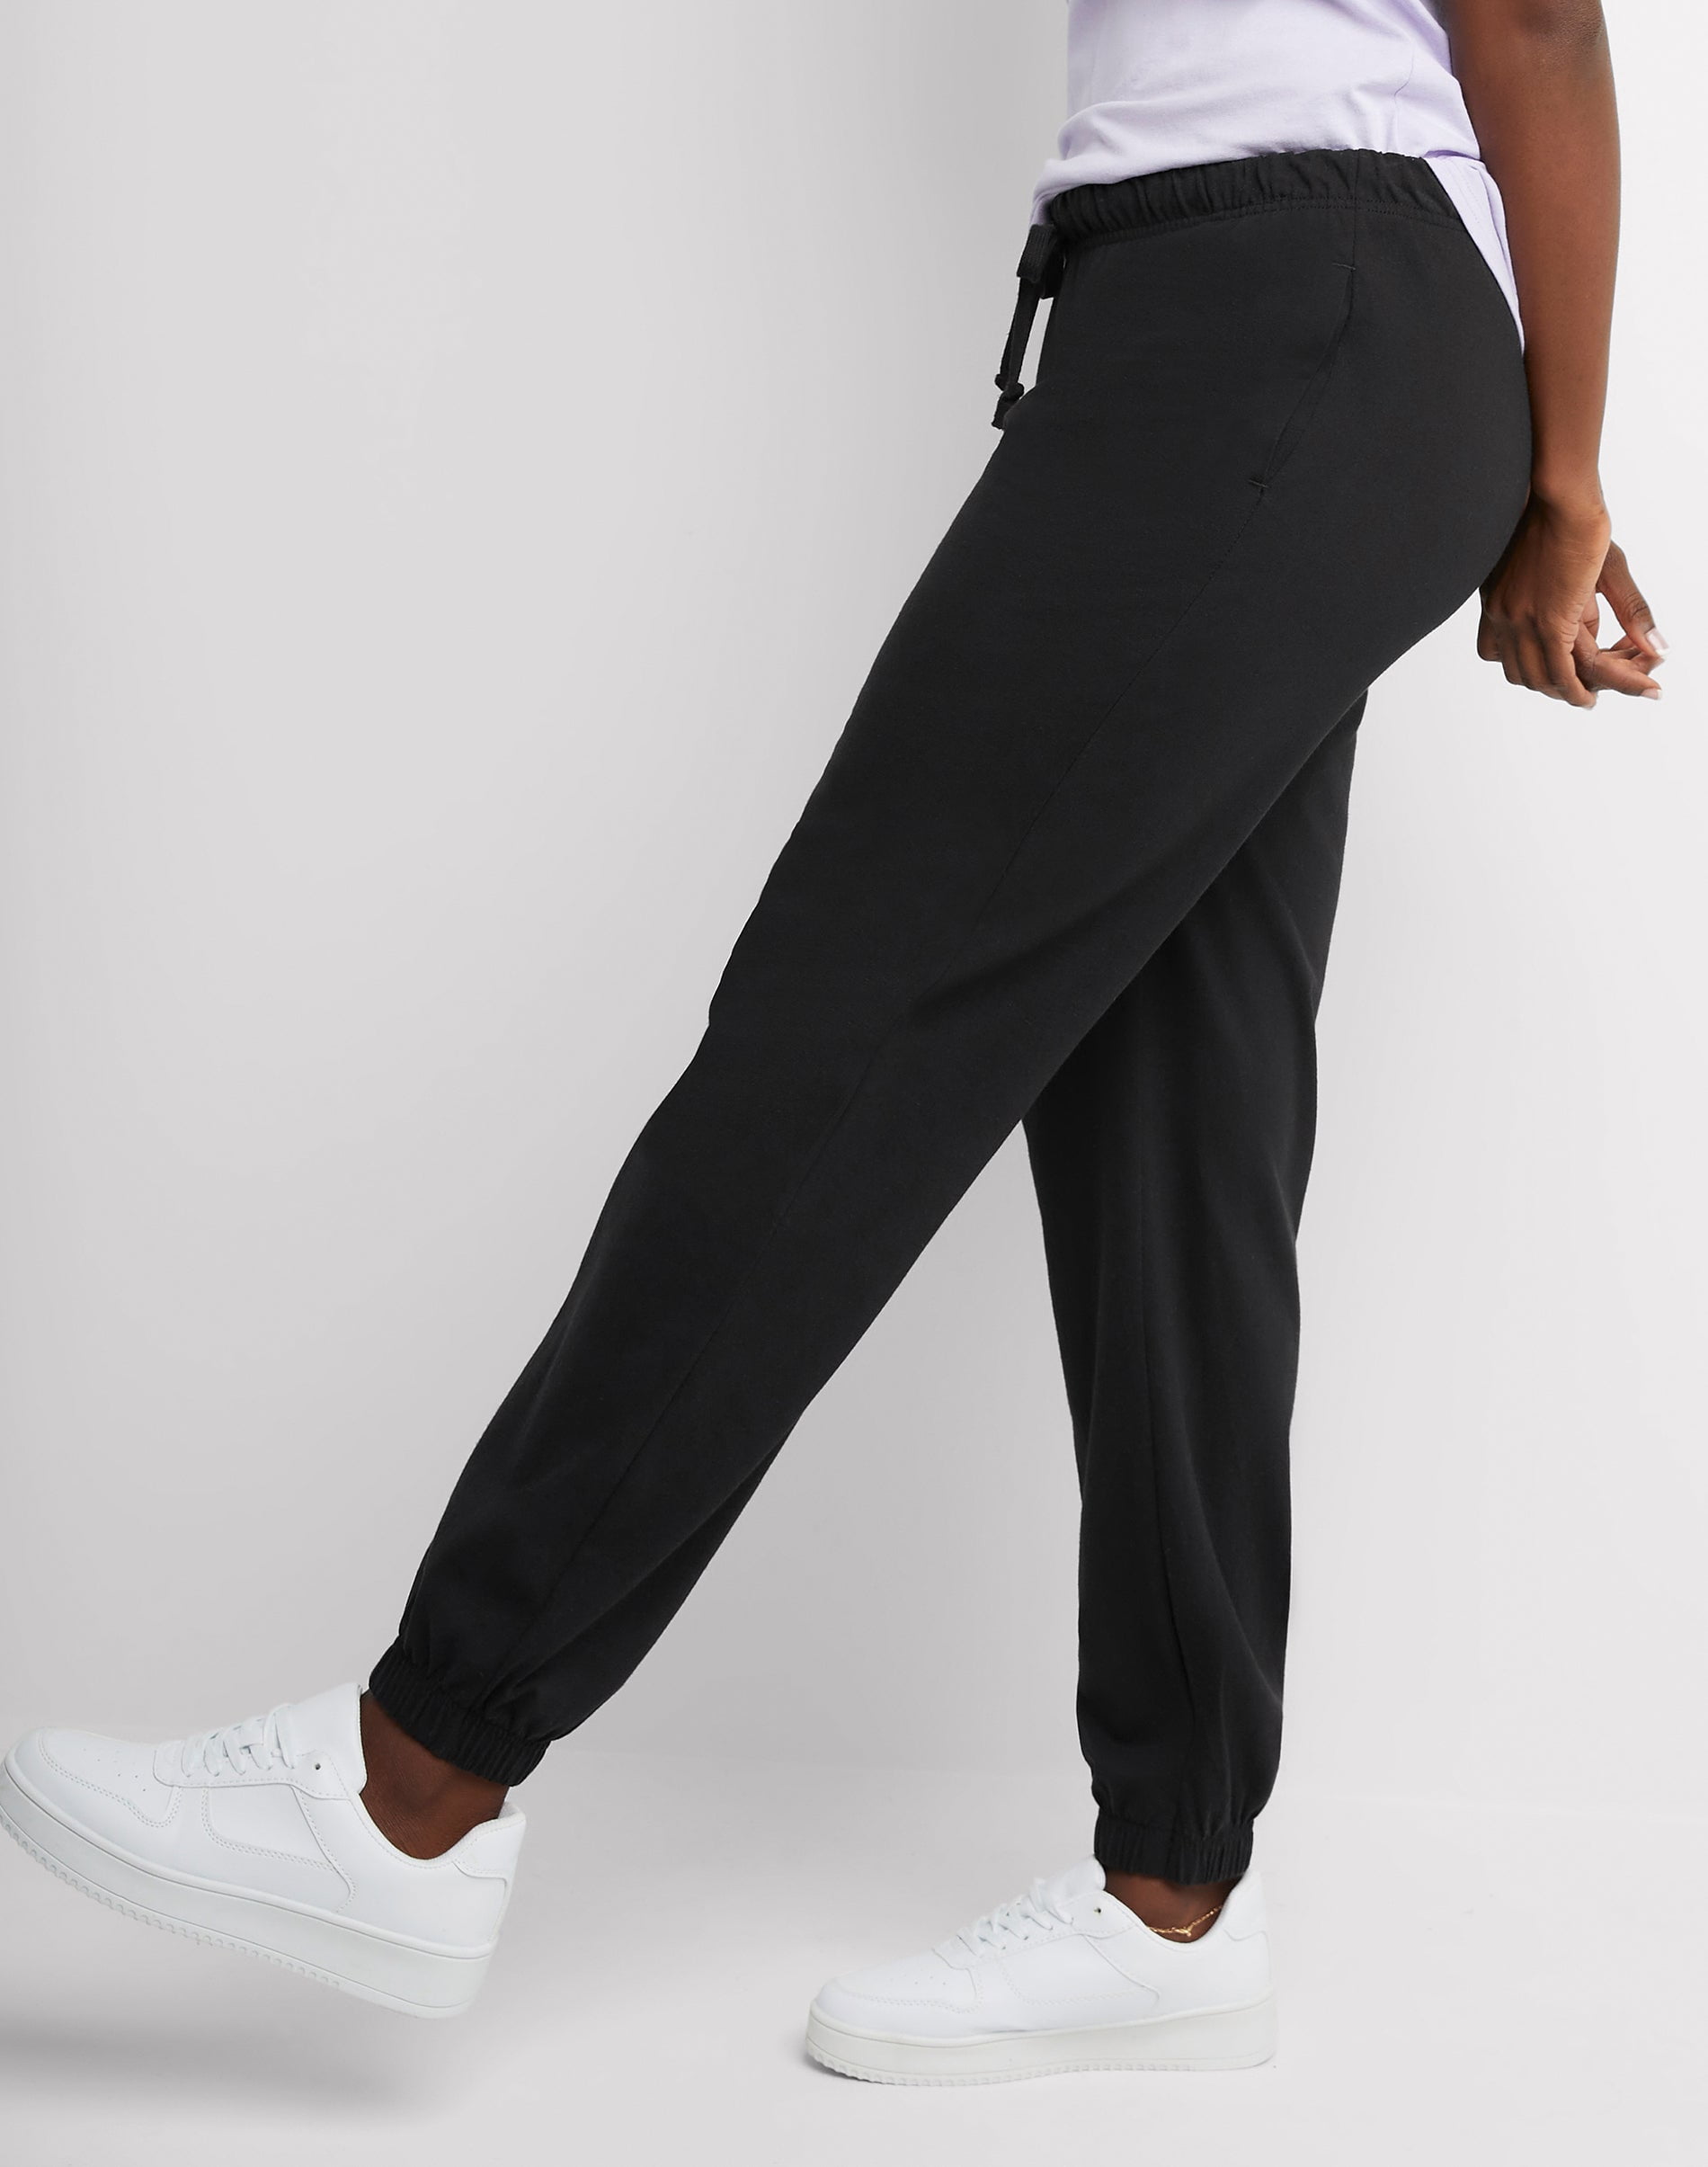 12 Wholesale Ladies Single Jersey Cotton Jogger Pants With Pockets In Black  Size Medium - at 